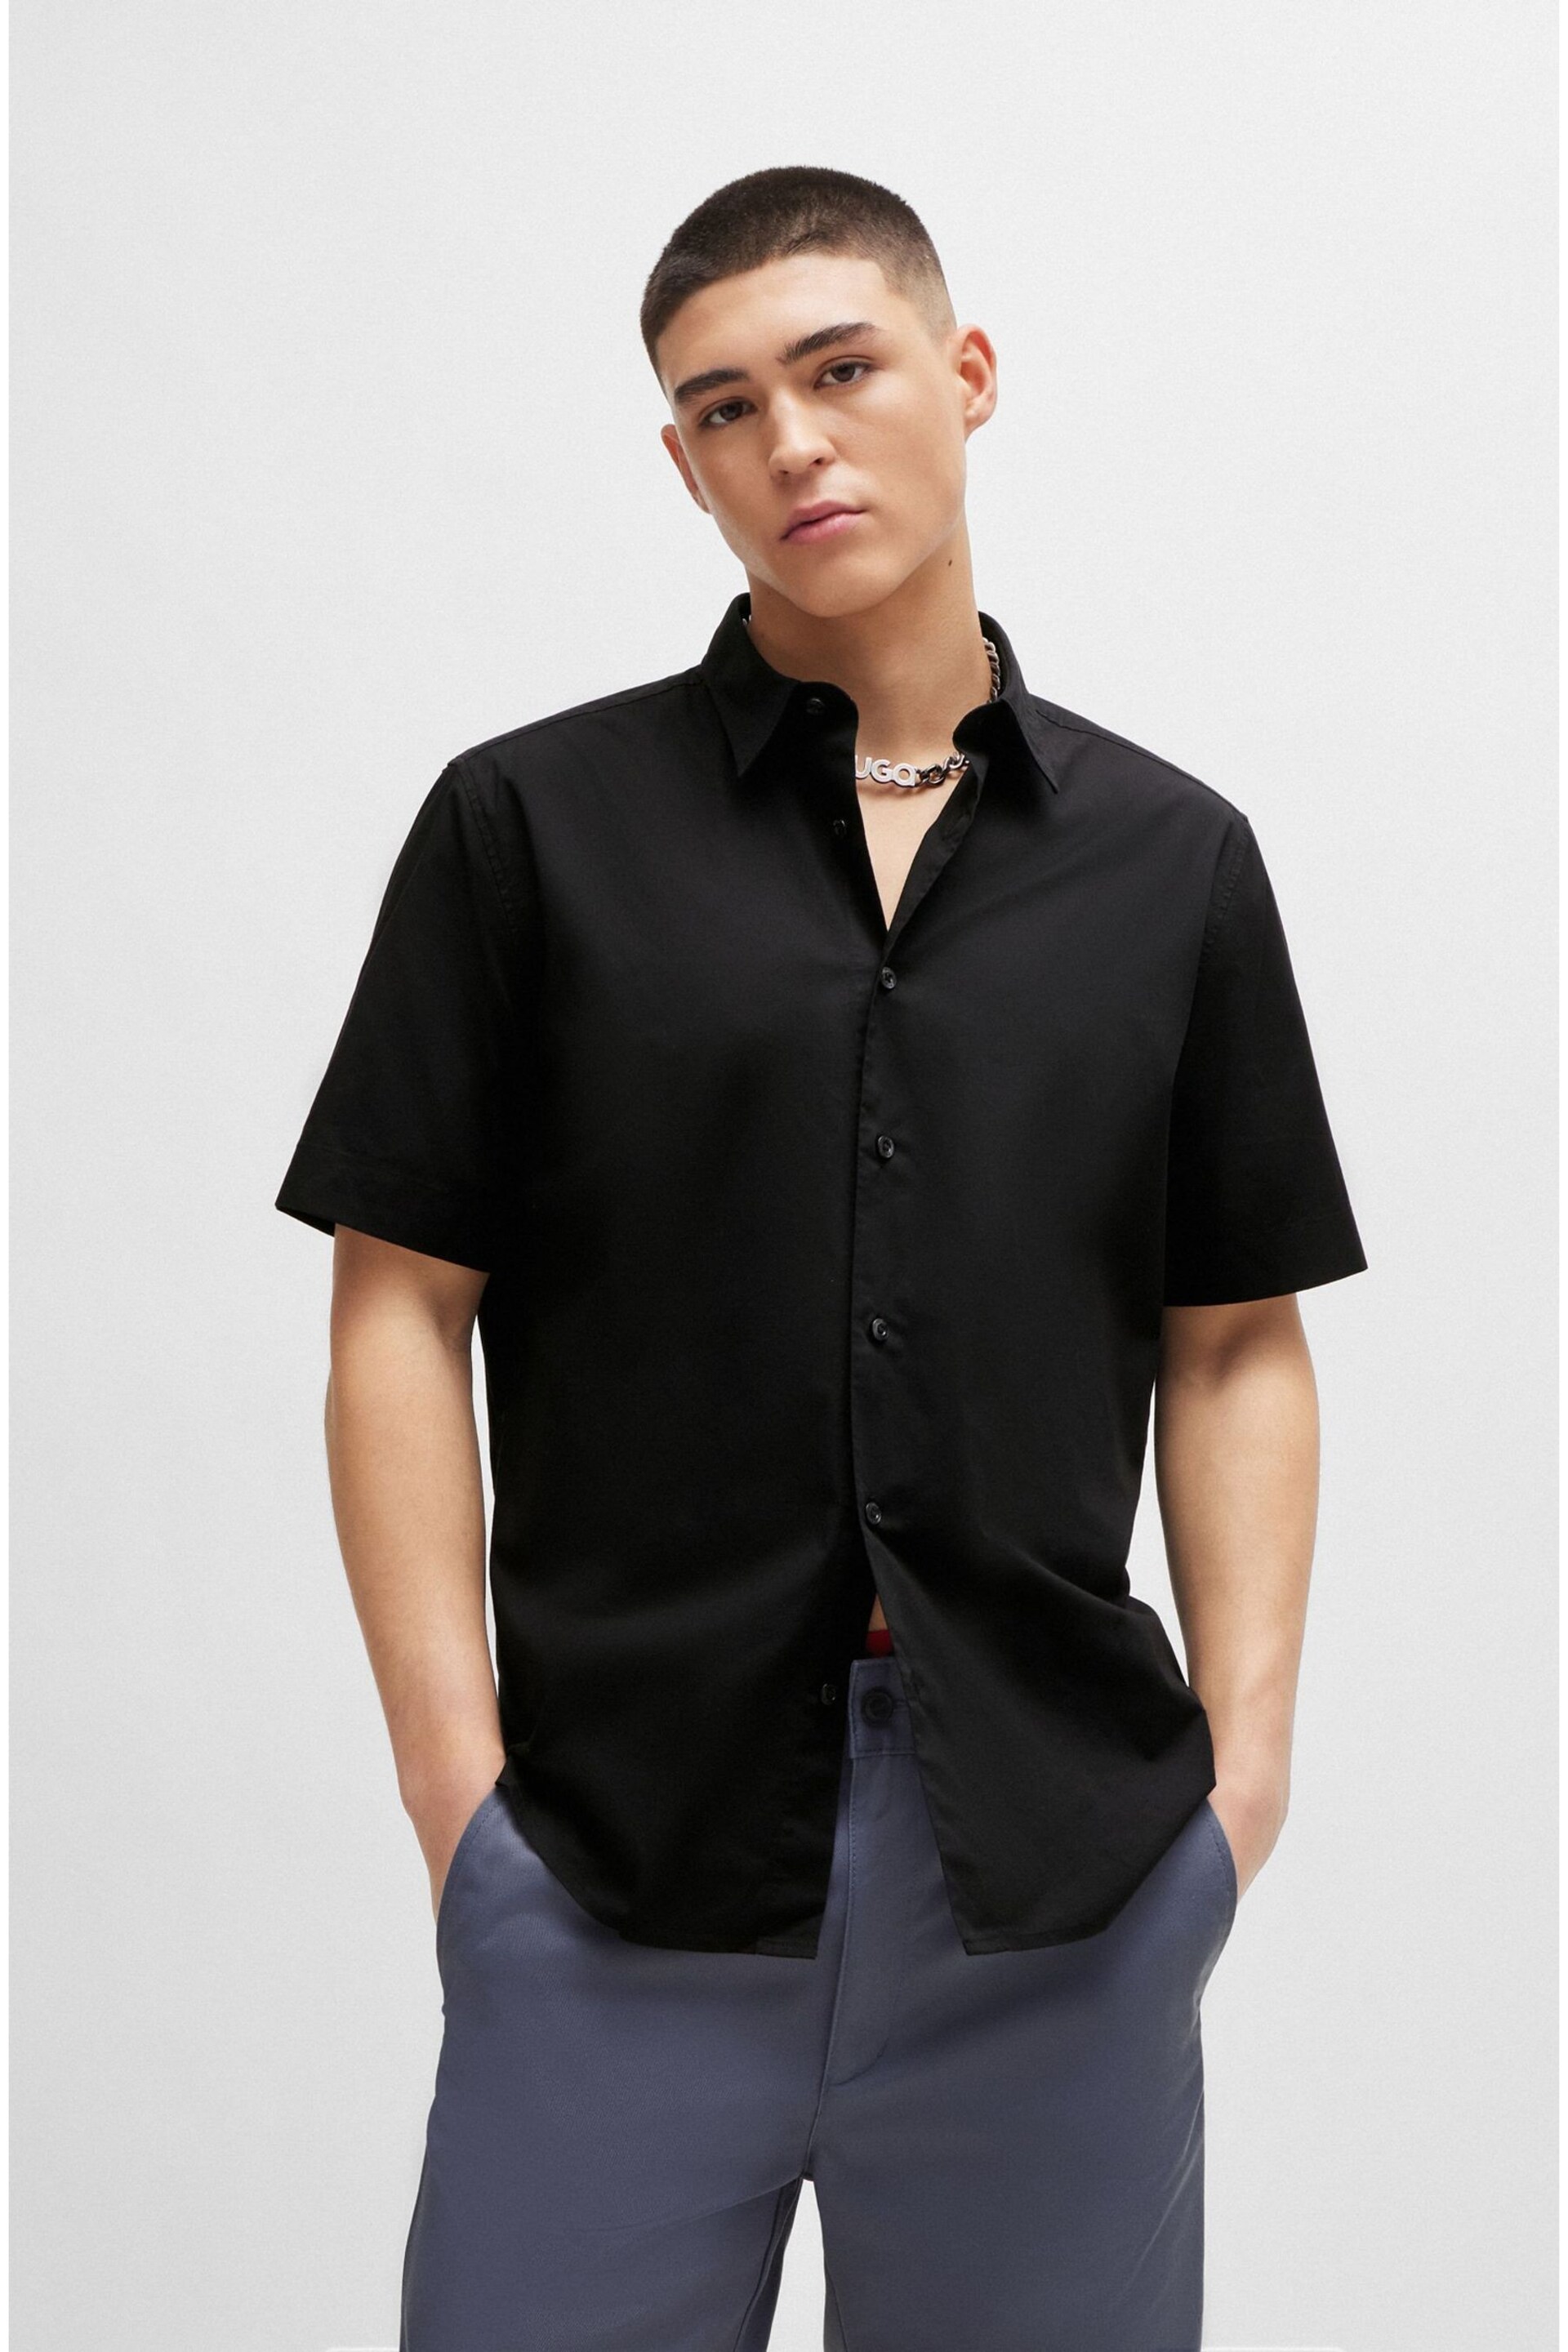 HUGO Relaxed Fit Black Shirt in Stretch Cotton Canvas - Image 1 of 6